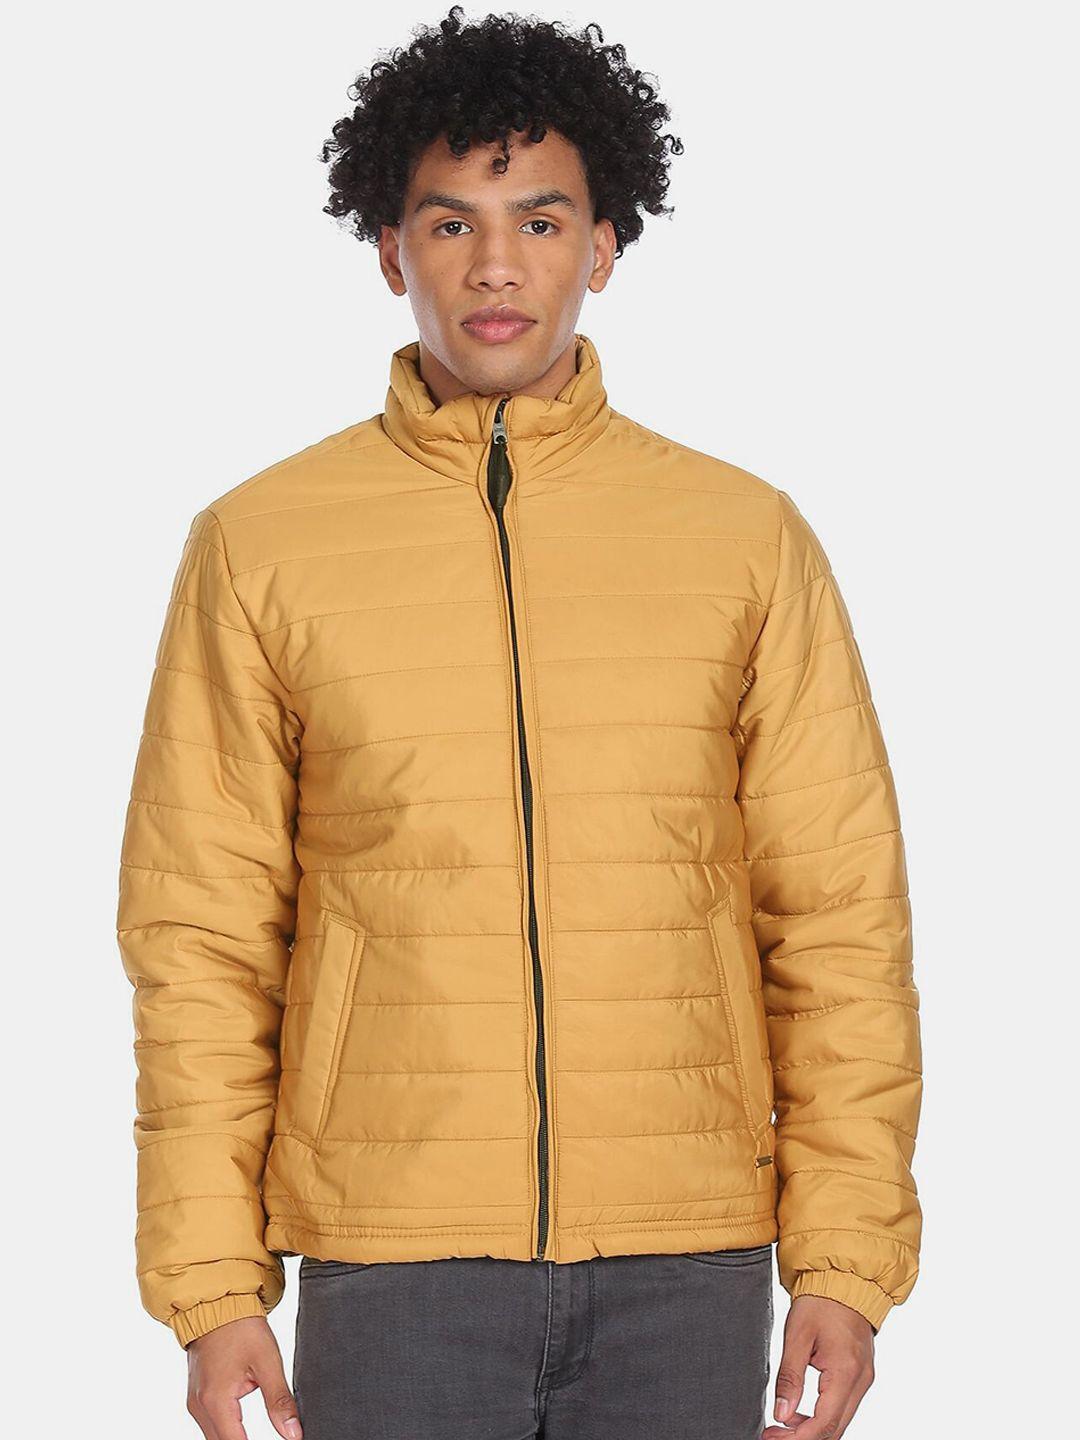 aeropostale-men-gold-toned-quilted-jacket